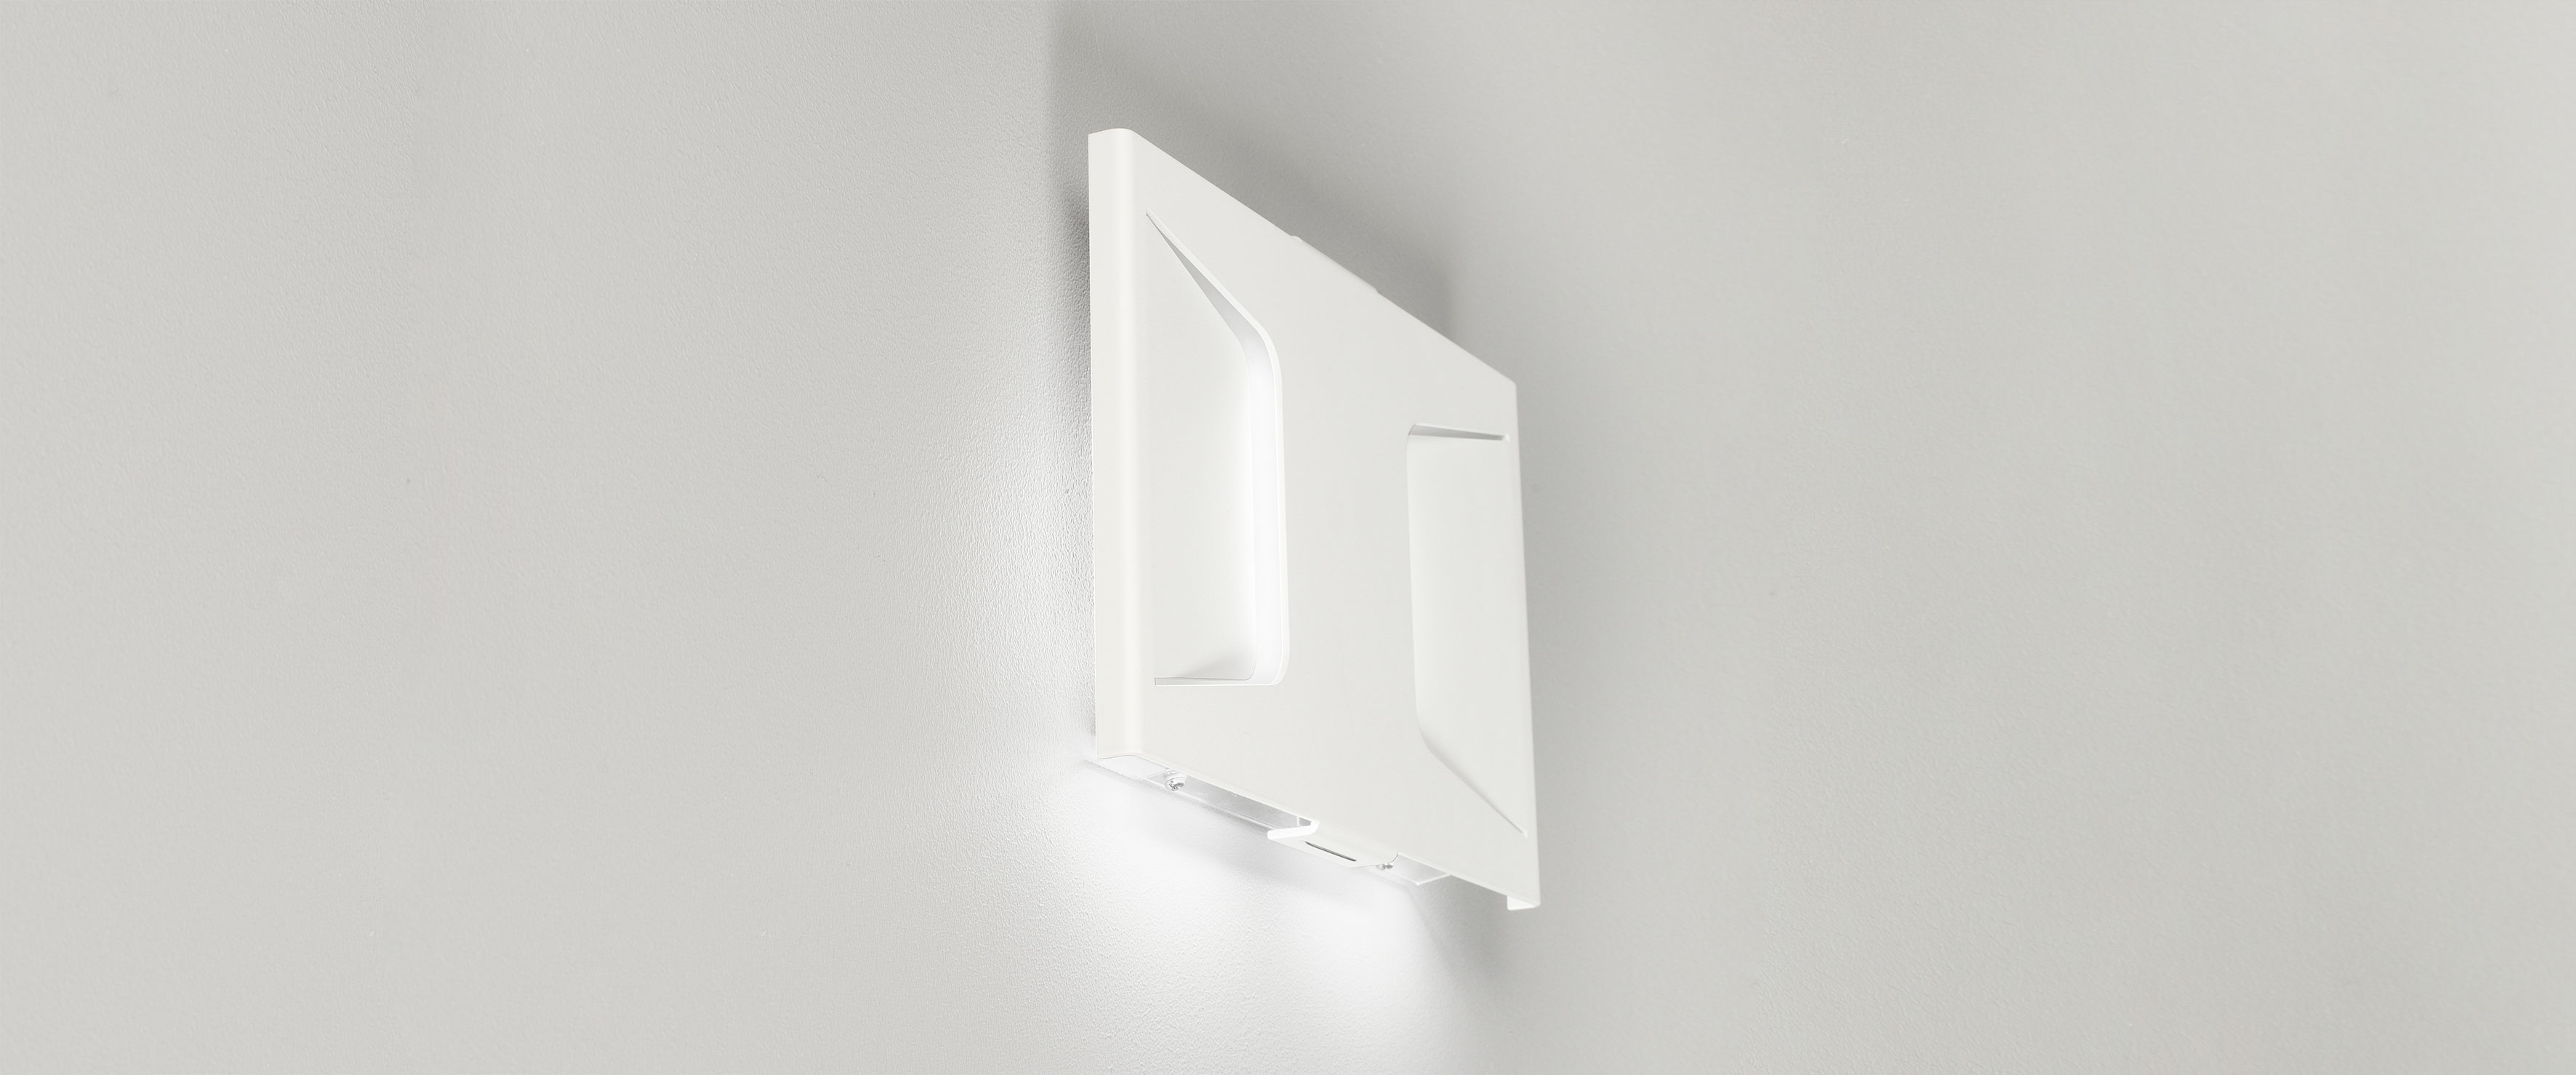 Most of the light is directed towards the floor. The luminaire also distributes light in and around the shade.